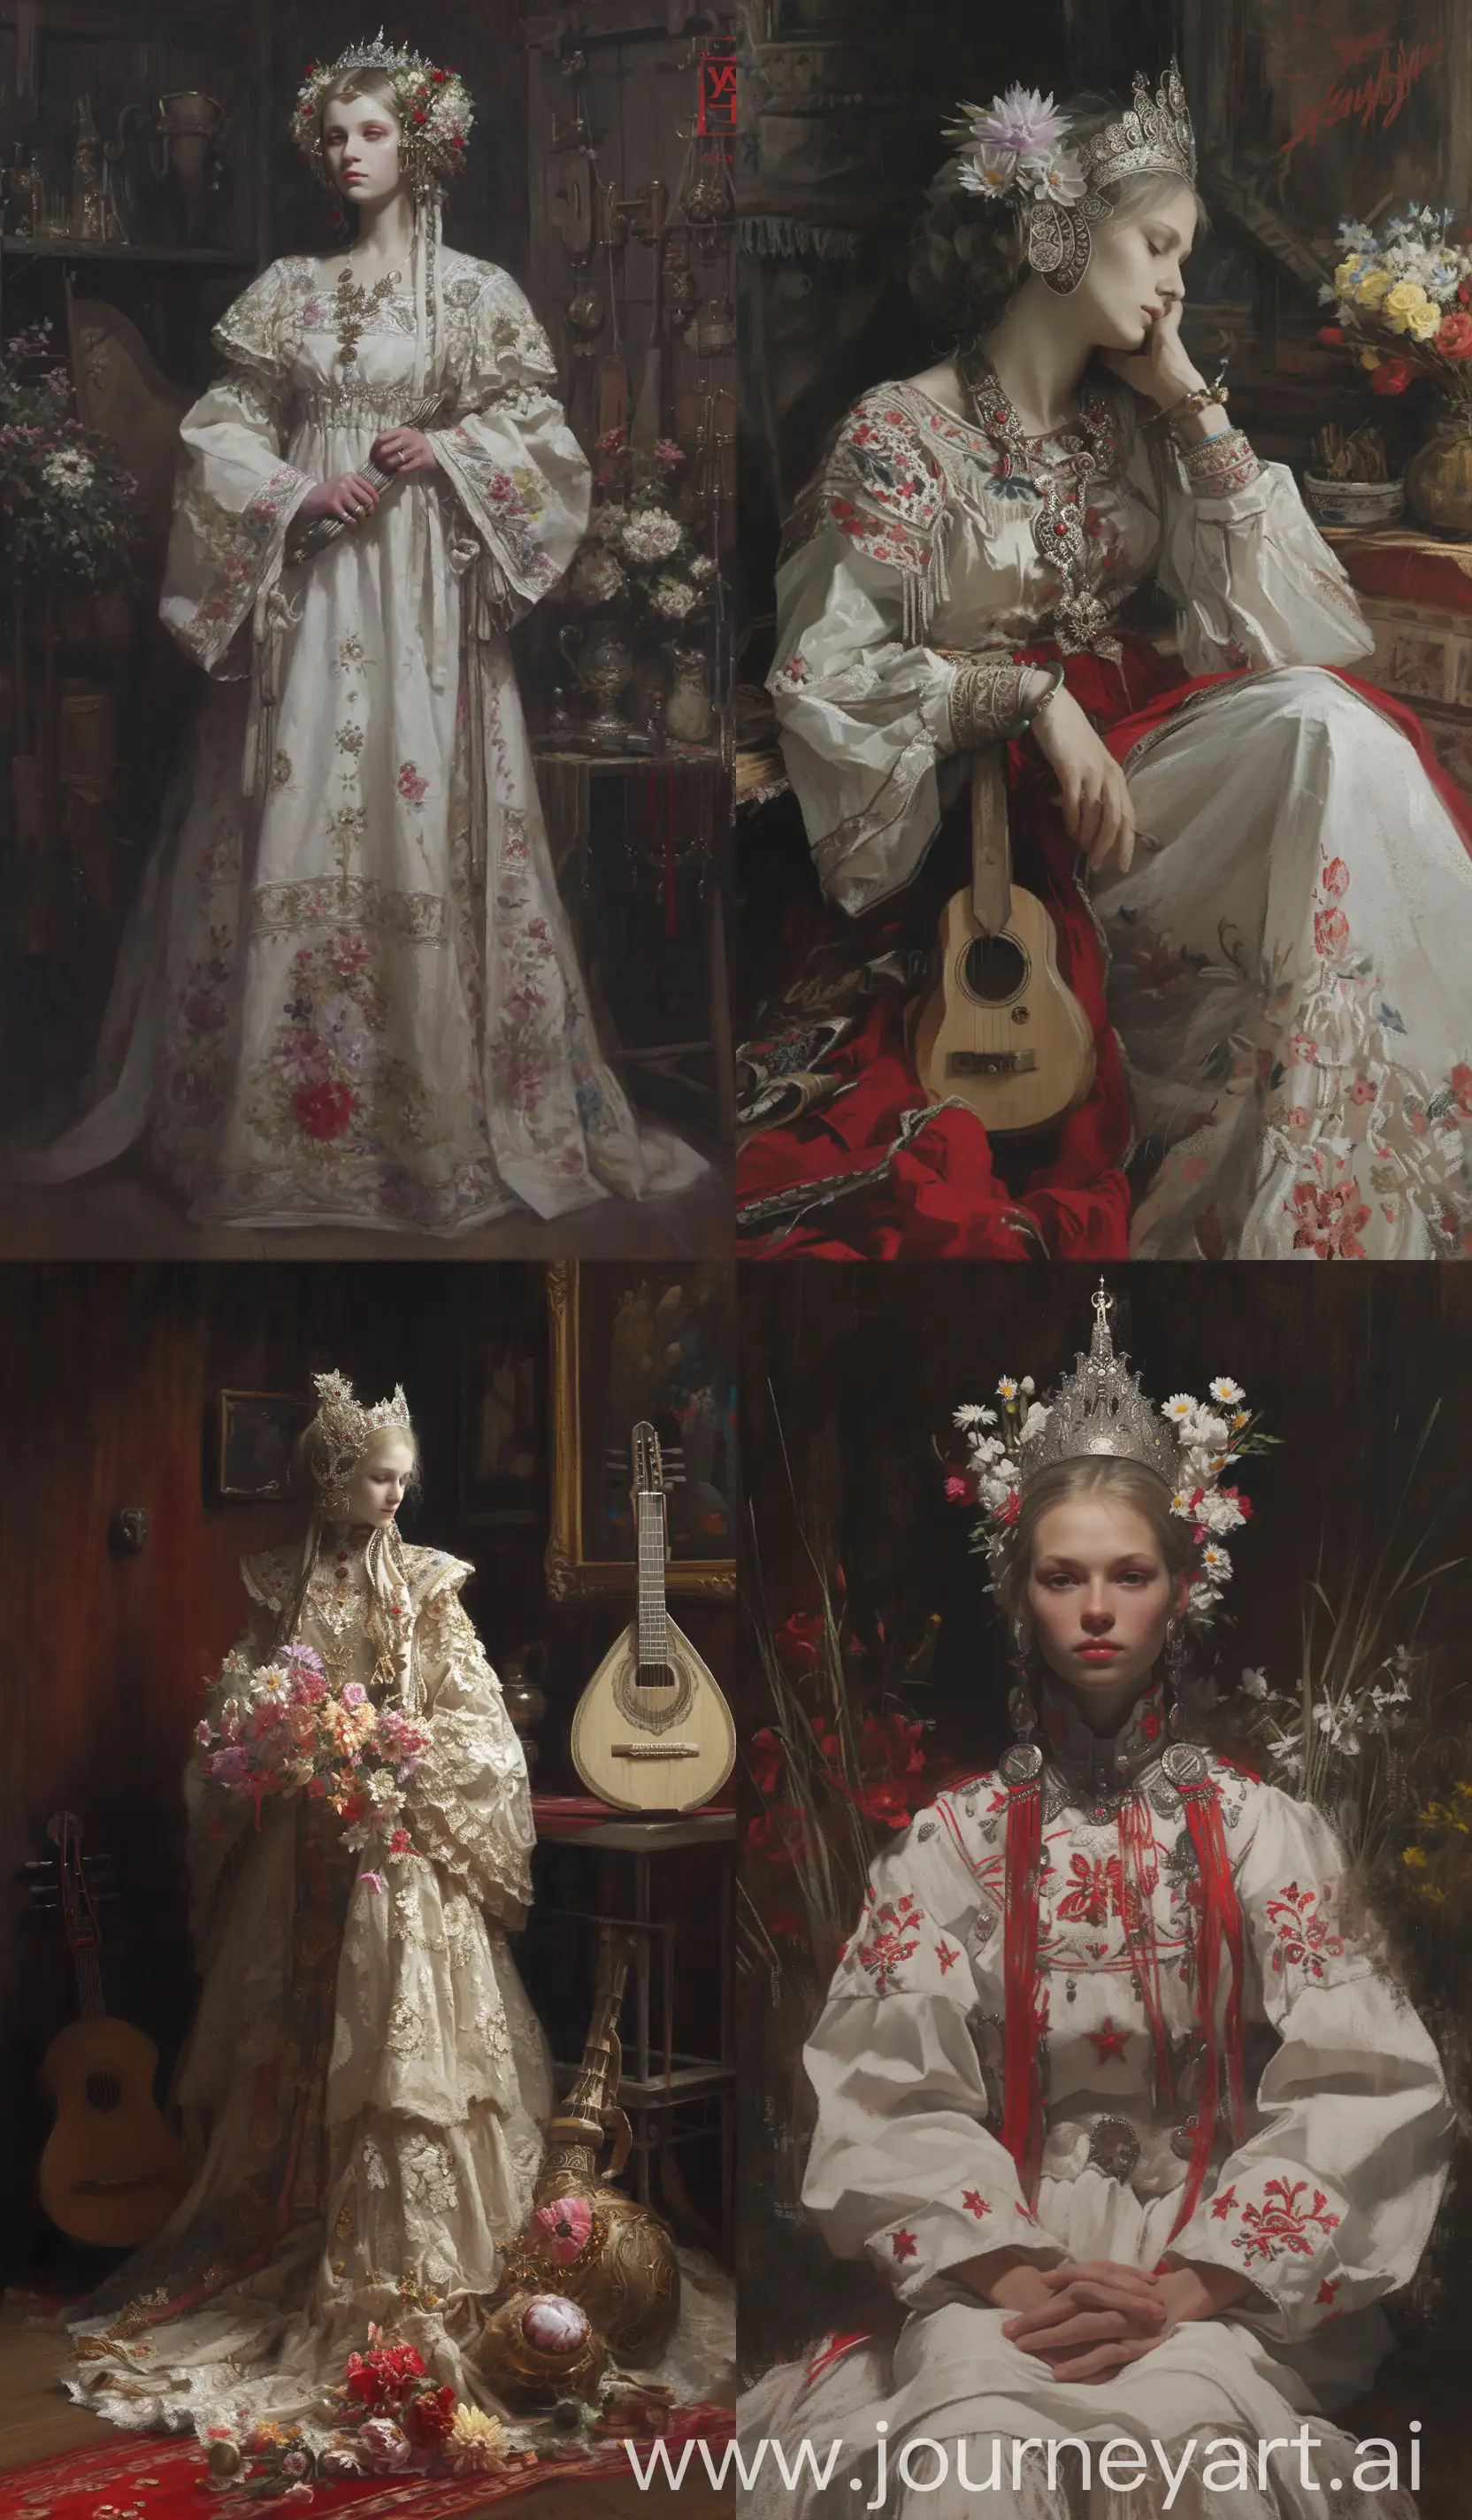 Slavic-Female-in-Traditional-Dress-with-Folklore-Instruments-and-Floral-Tiara-Cyberpunk-Colored-Pencil-Drawing